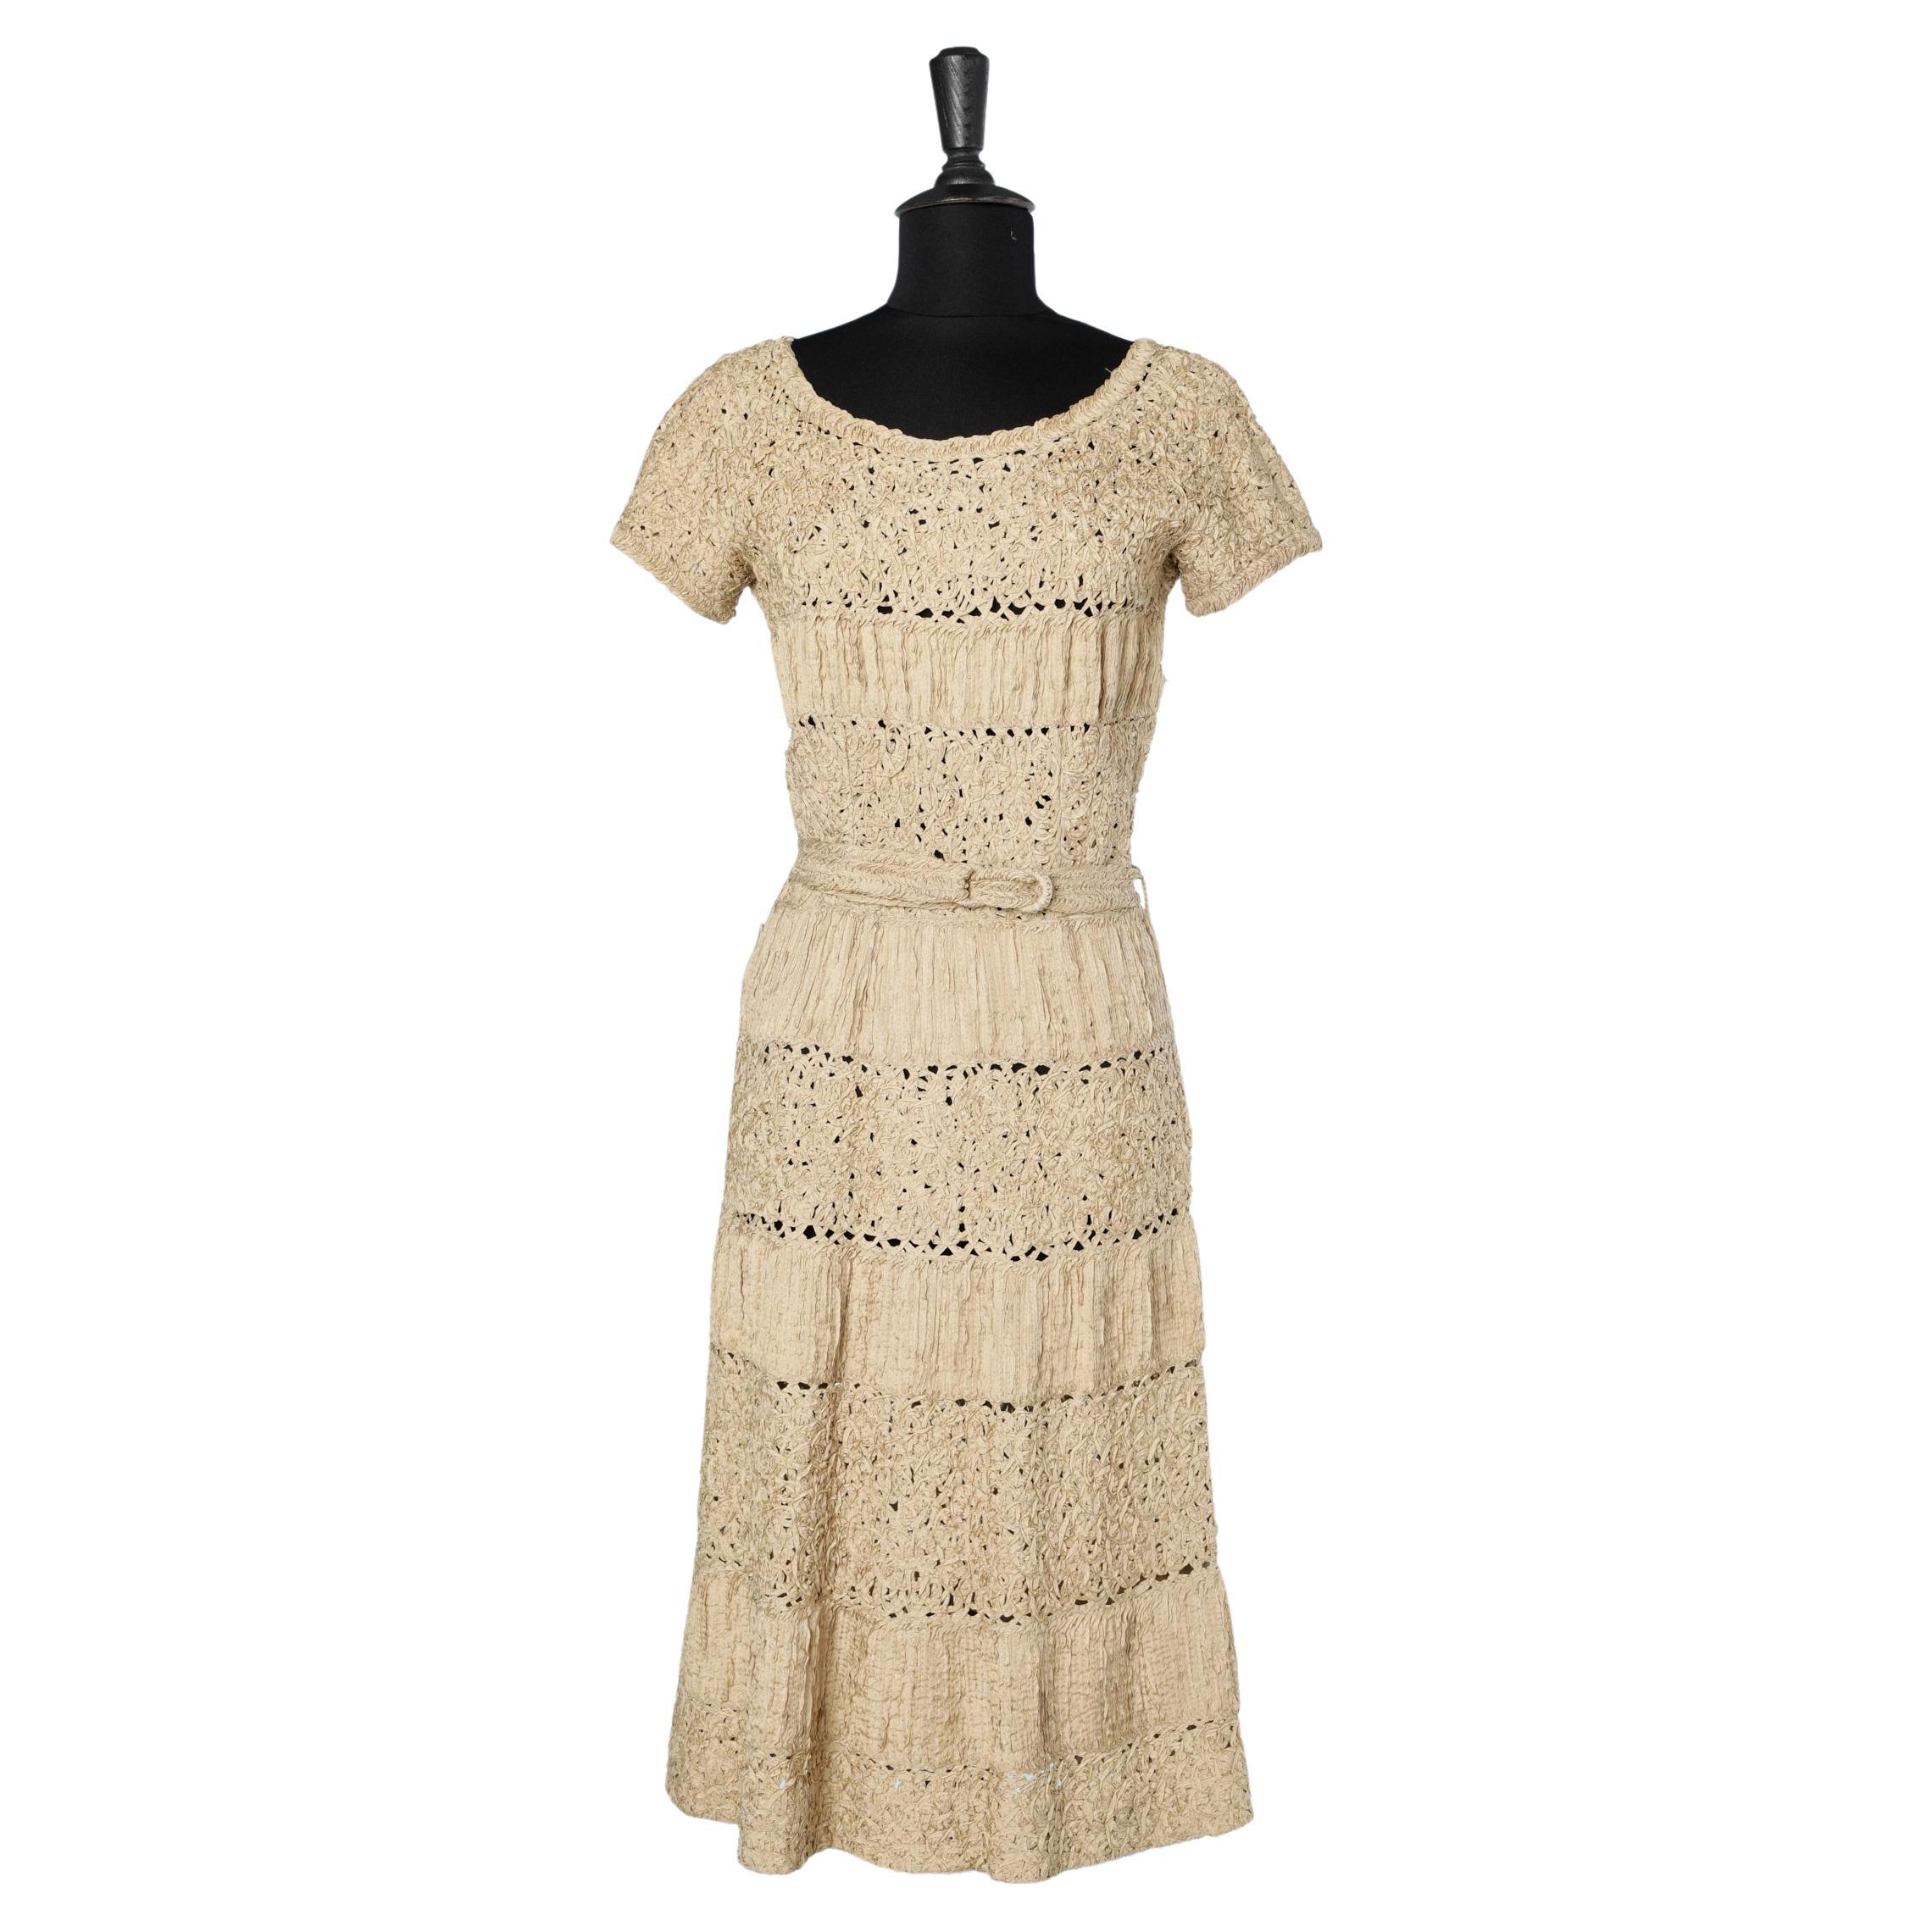 Beige dress knitted with ribbons LANA Circa 1940/50 For Sale